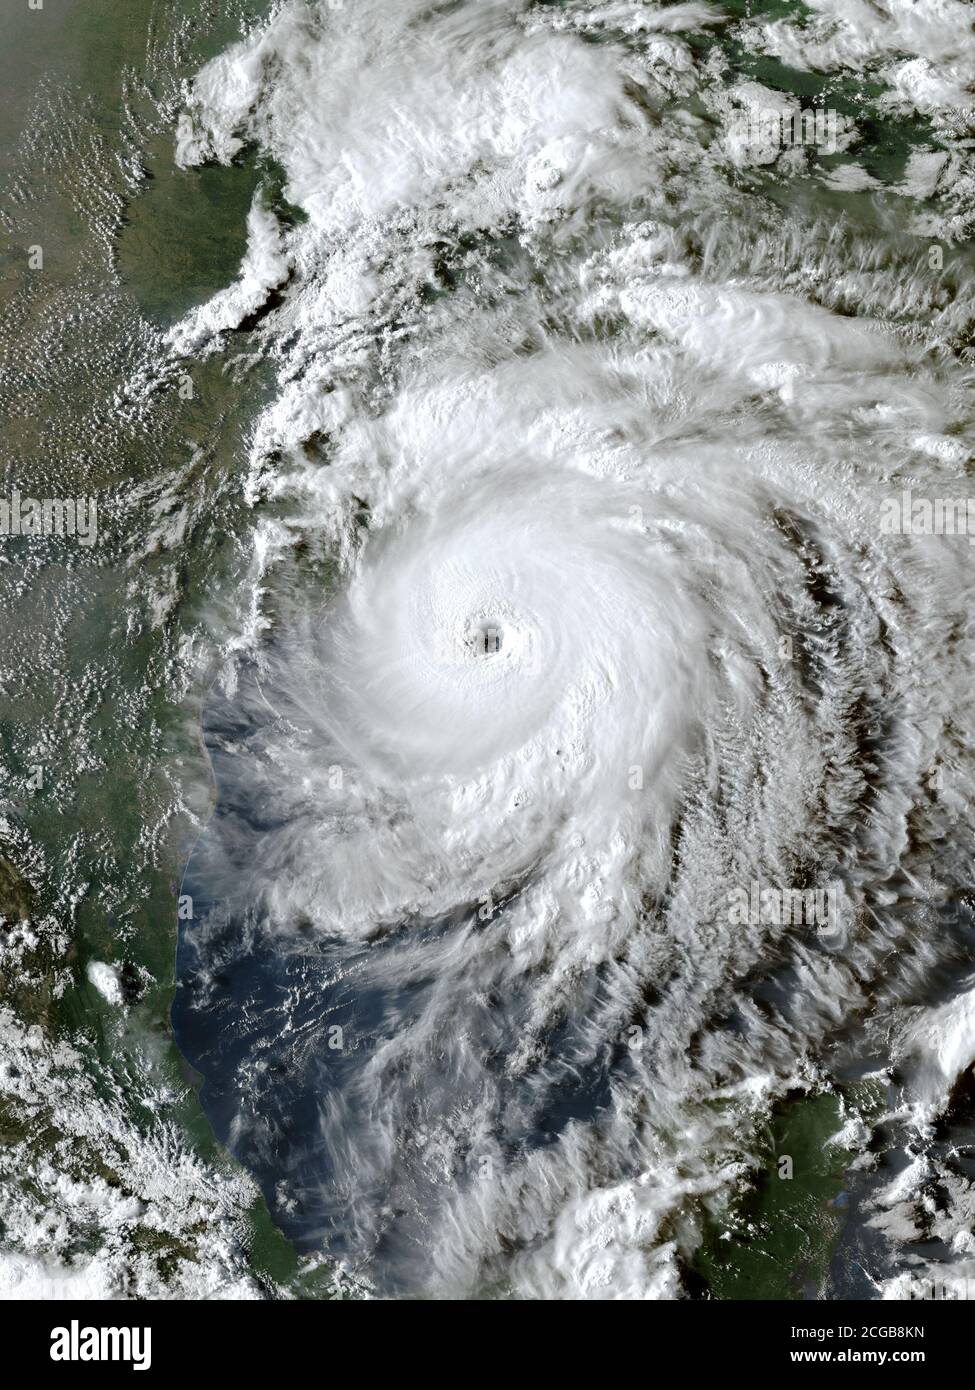 Hurricane Laura was a deadly and damaging Category 4 Atlantic hurricane that tied the 1856 Last Island hurricane as the strongest hurricane on record to make landfall in the U.S. state of Louisiana, as measured by maximum sustained winds. Early on August 27, Laura made landfall near peak intensity at Cameron, Louisiana. (USA) Stock Photo